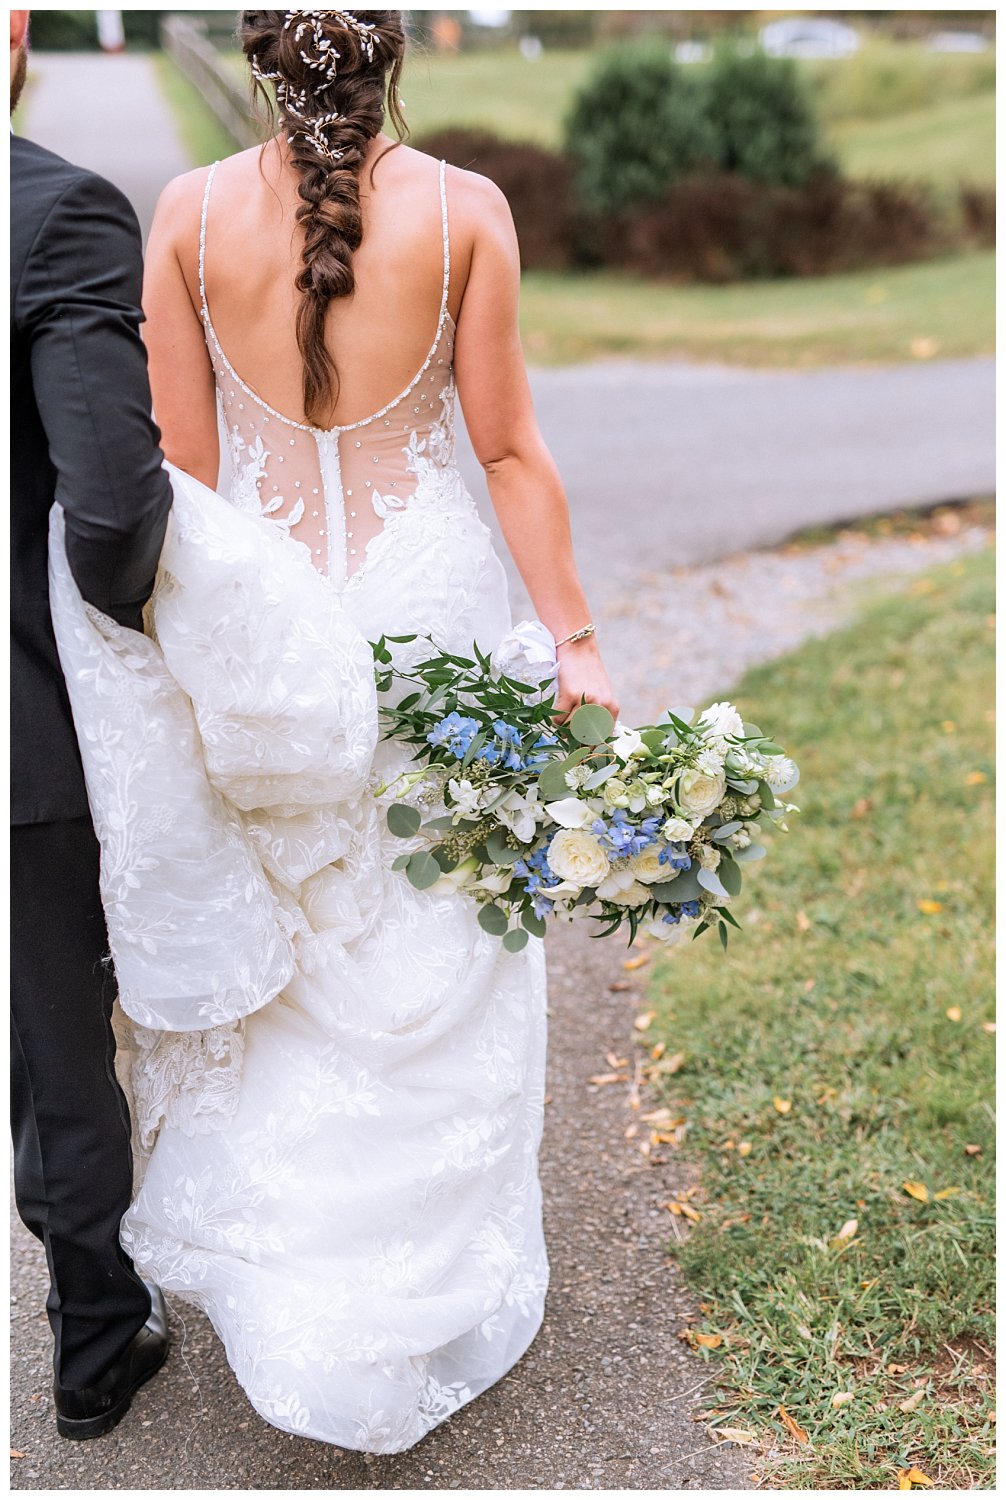 Bride & Groom portraits at Westover & Maymont Gardens wedding with blue and white bridal bouquet